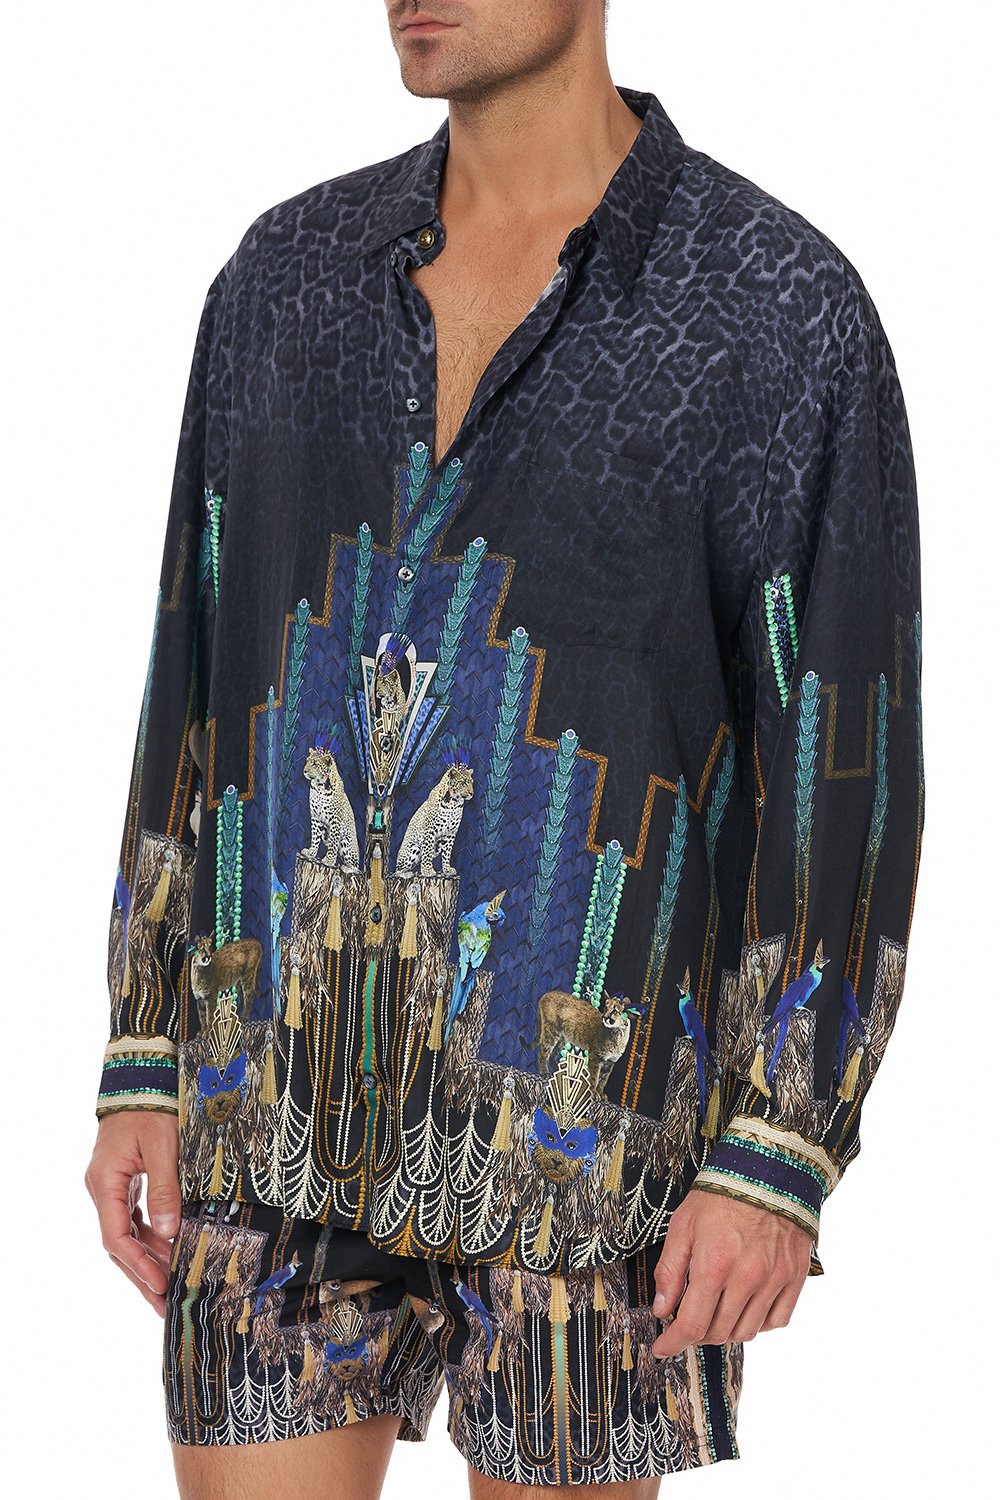 MENS OVERSIZED SHIRT DRIPPING IN DECO